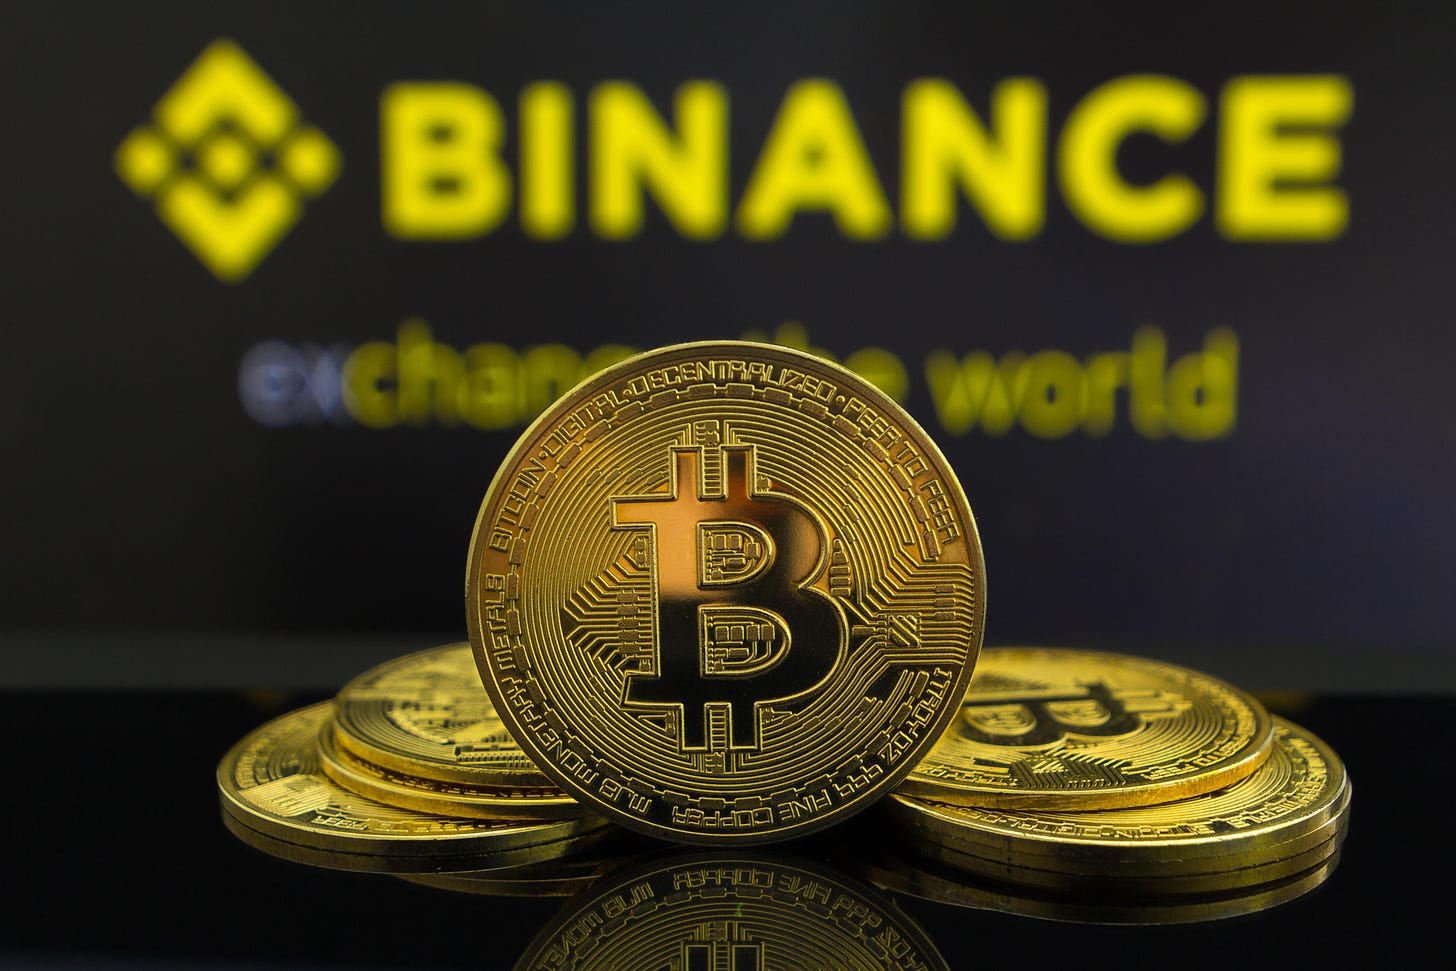 City watchdog bans Binance crypto exchange | Business | The Times